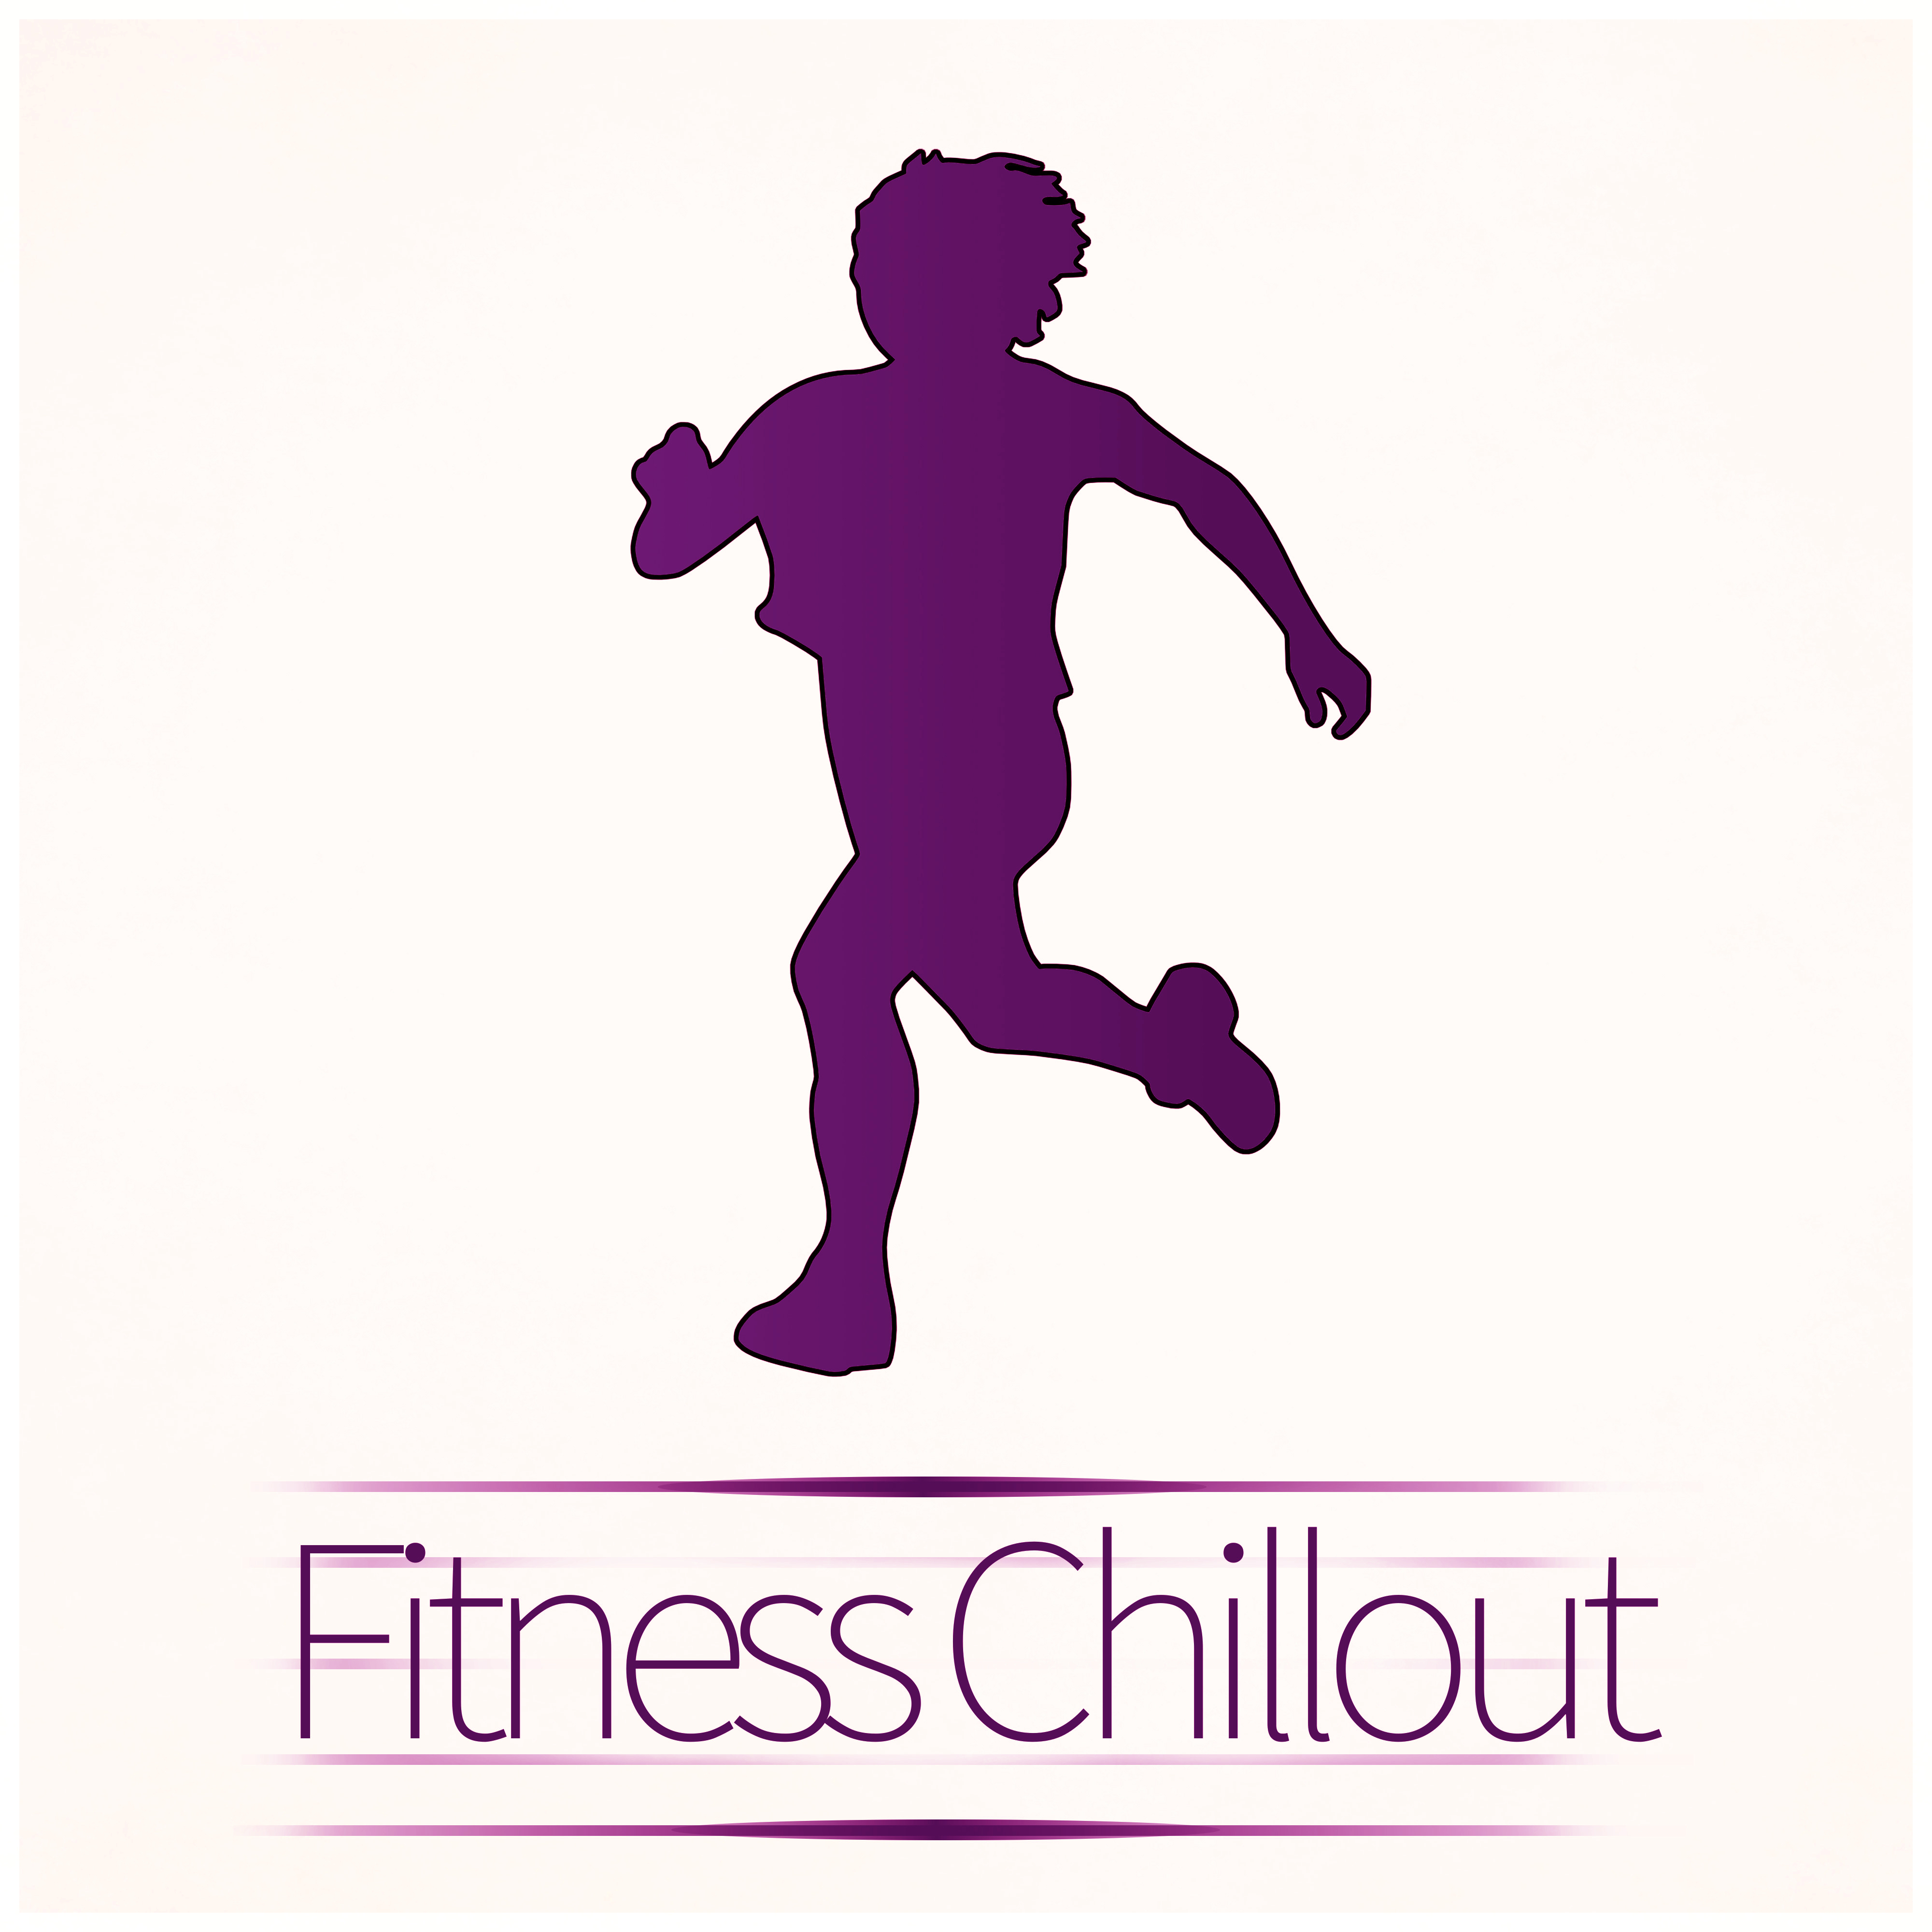 Fitness Chillout – Natural Health, Gym, Cardo, Chill, Body Balancing, Fitness, Calorie Burner, Instructor Music, Motivation Music, Training